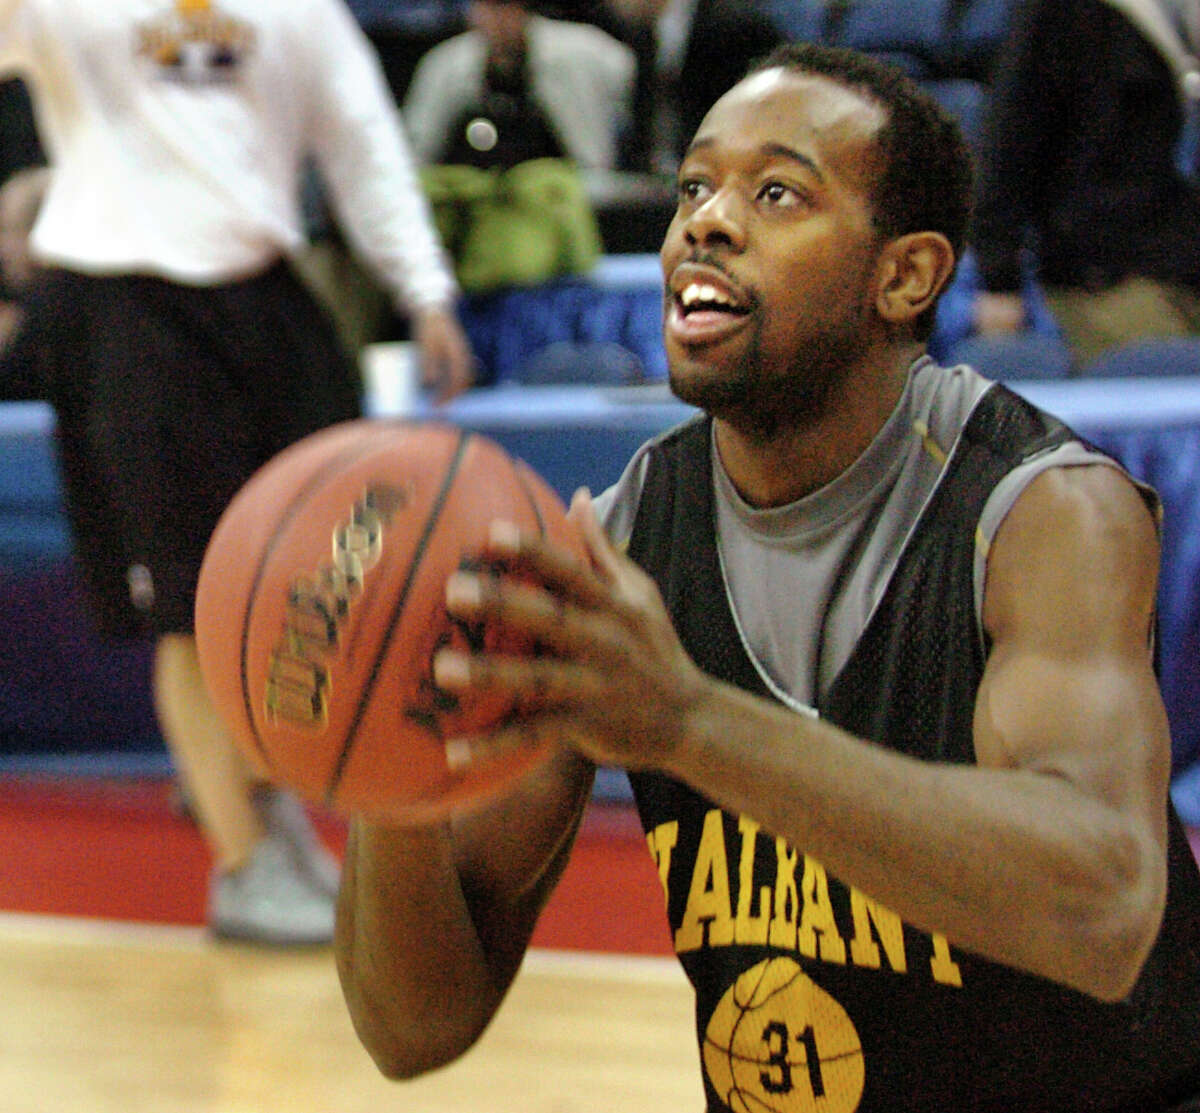 Times Union staff photo by Cindy Schultz -- UAlbany basketball player Jamar Wilson warms up during an open practice on Wednesday, March 14, 2007, at Nationwide Arena in Columbus, Ohio. UAlbany is in Columbus for the NCAA Tournament. (WITH SINGLAIS STORY)